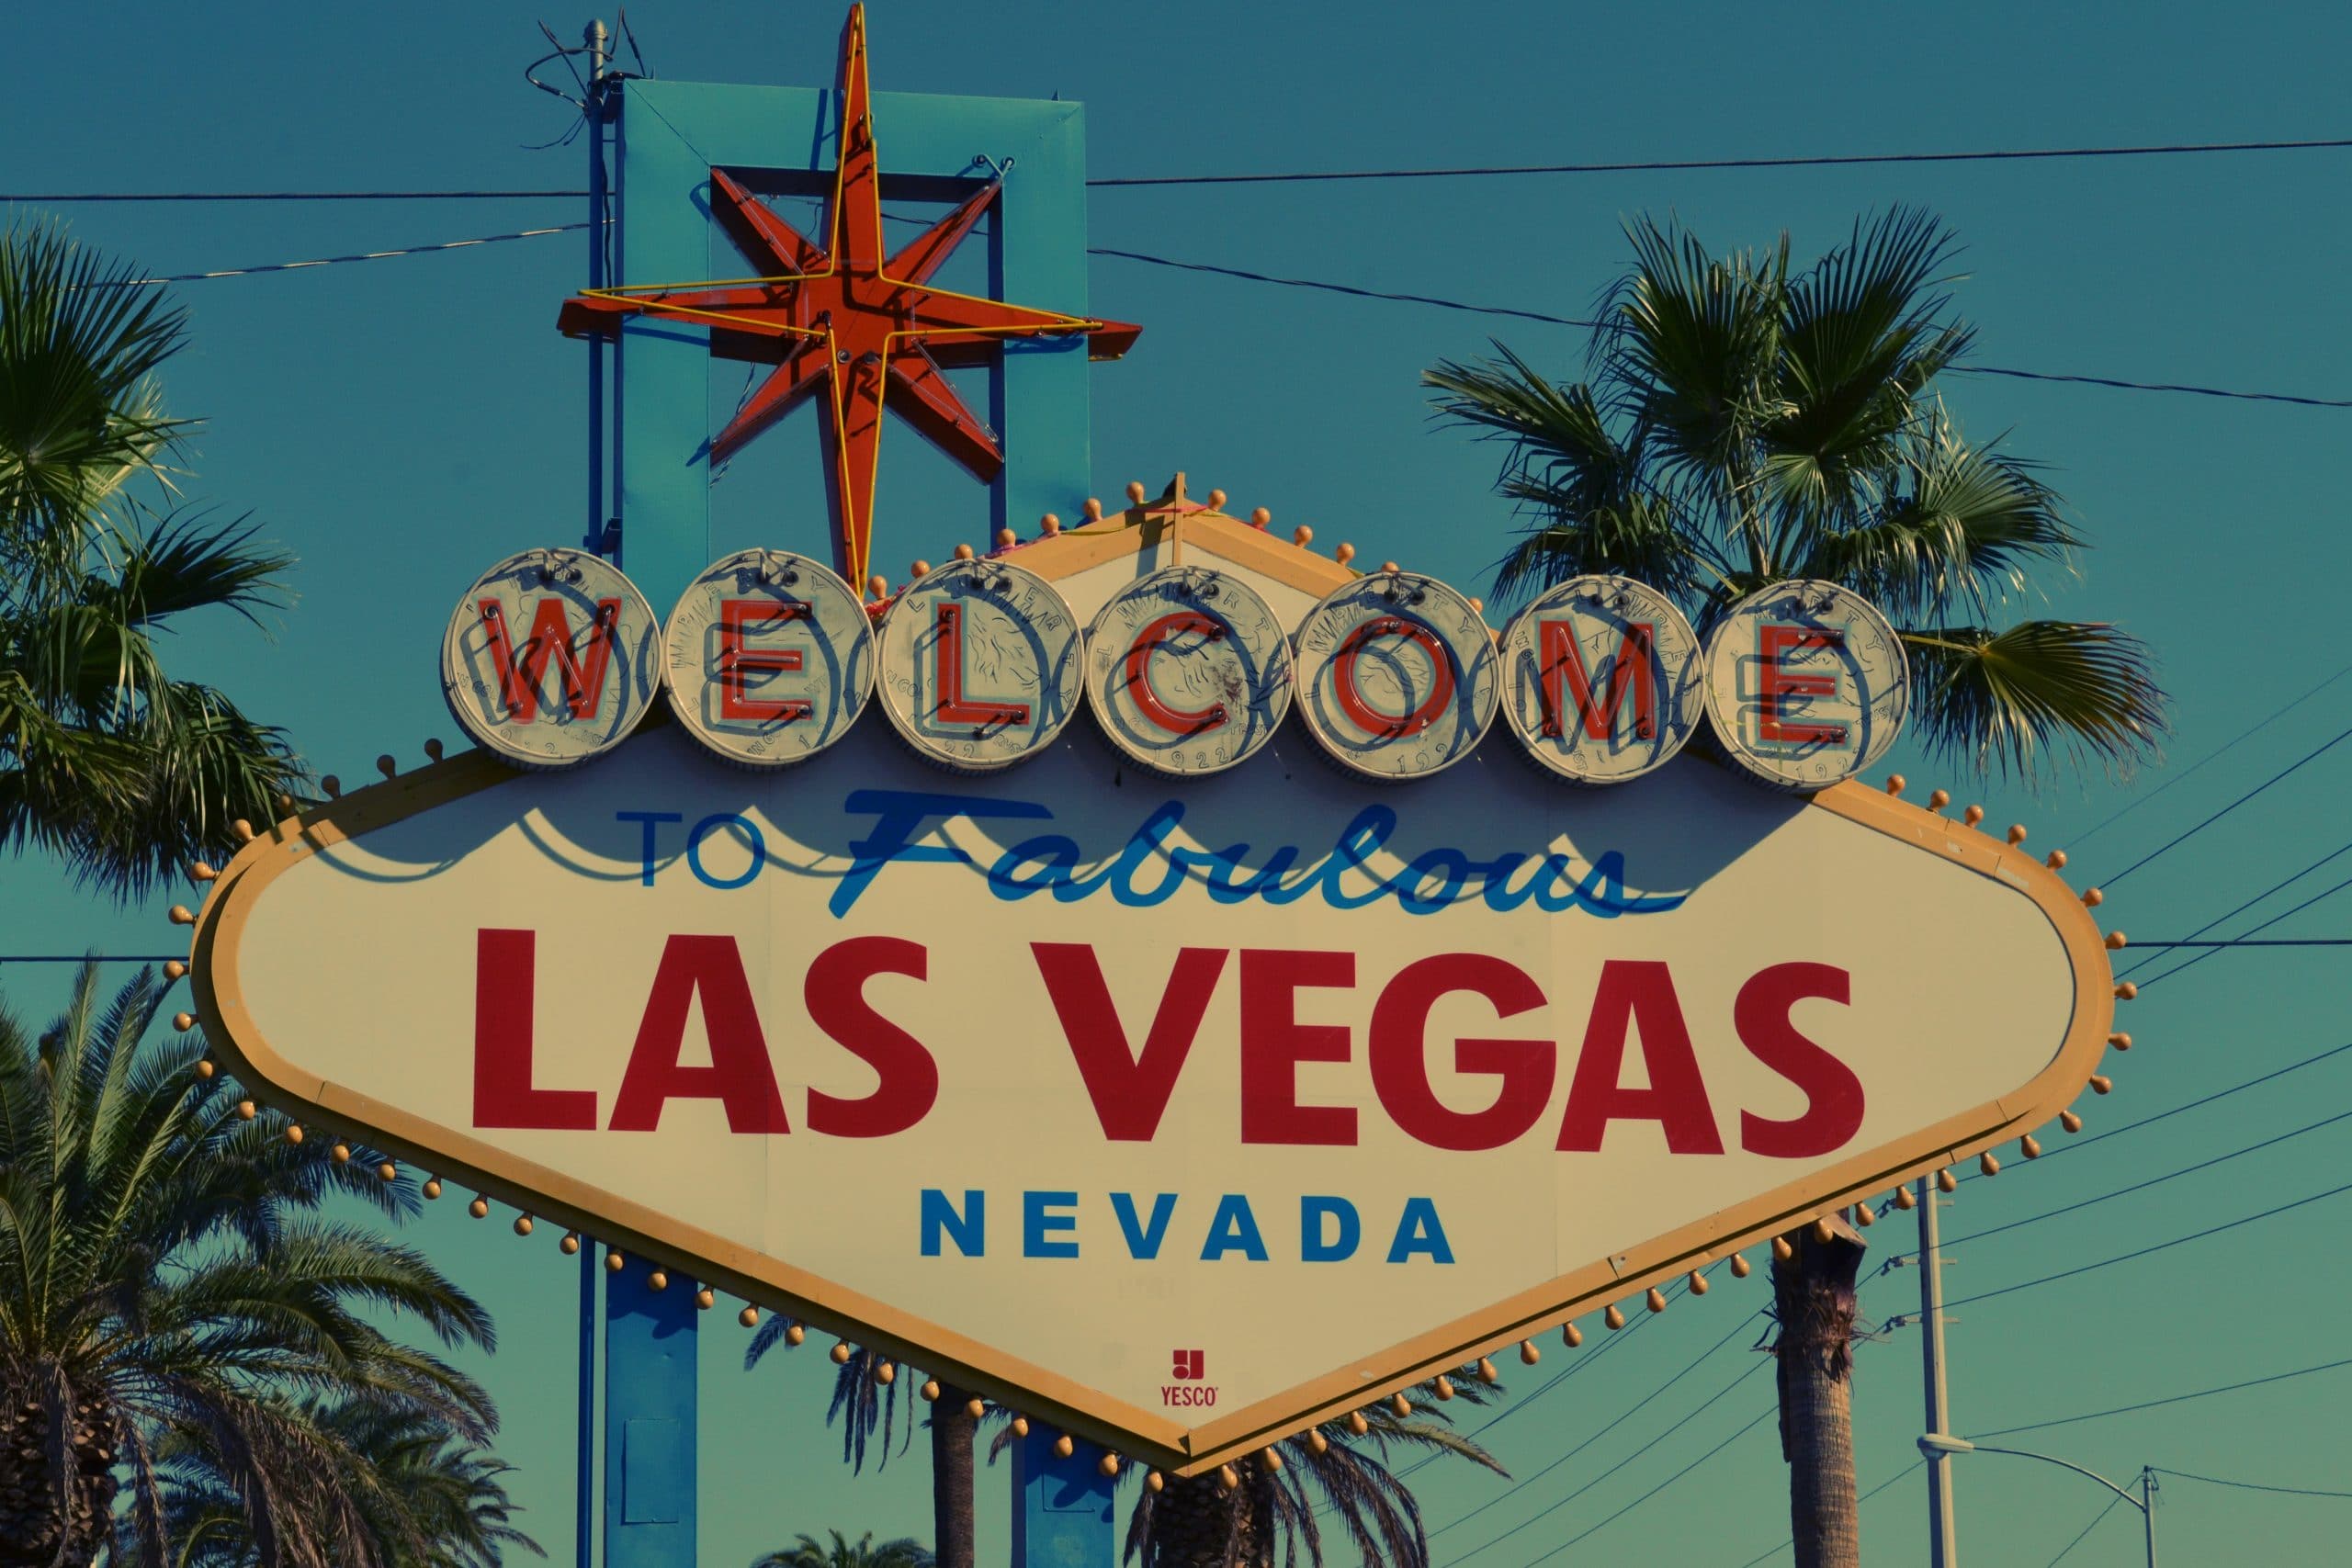 Photo of the "Welcome to Las Vegas" sign